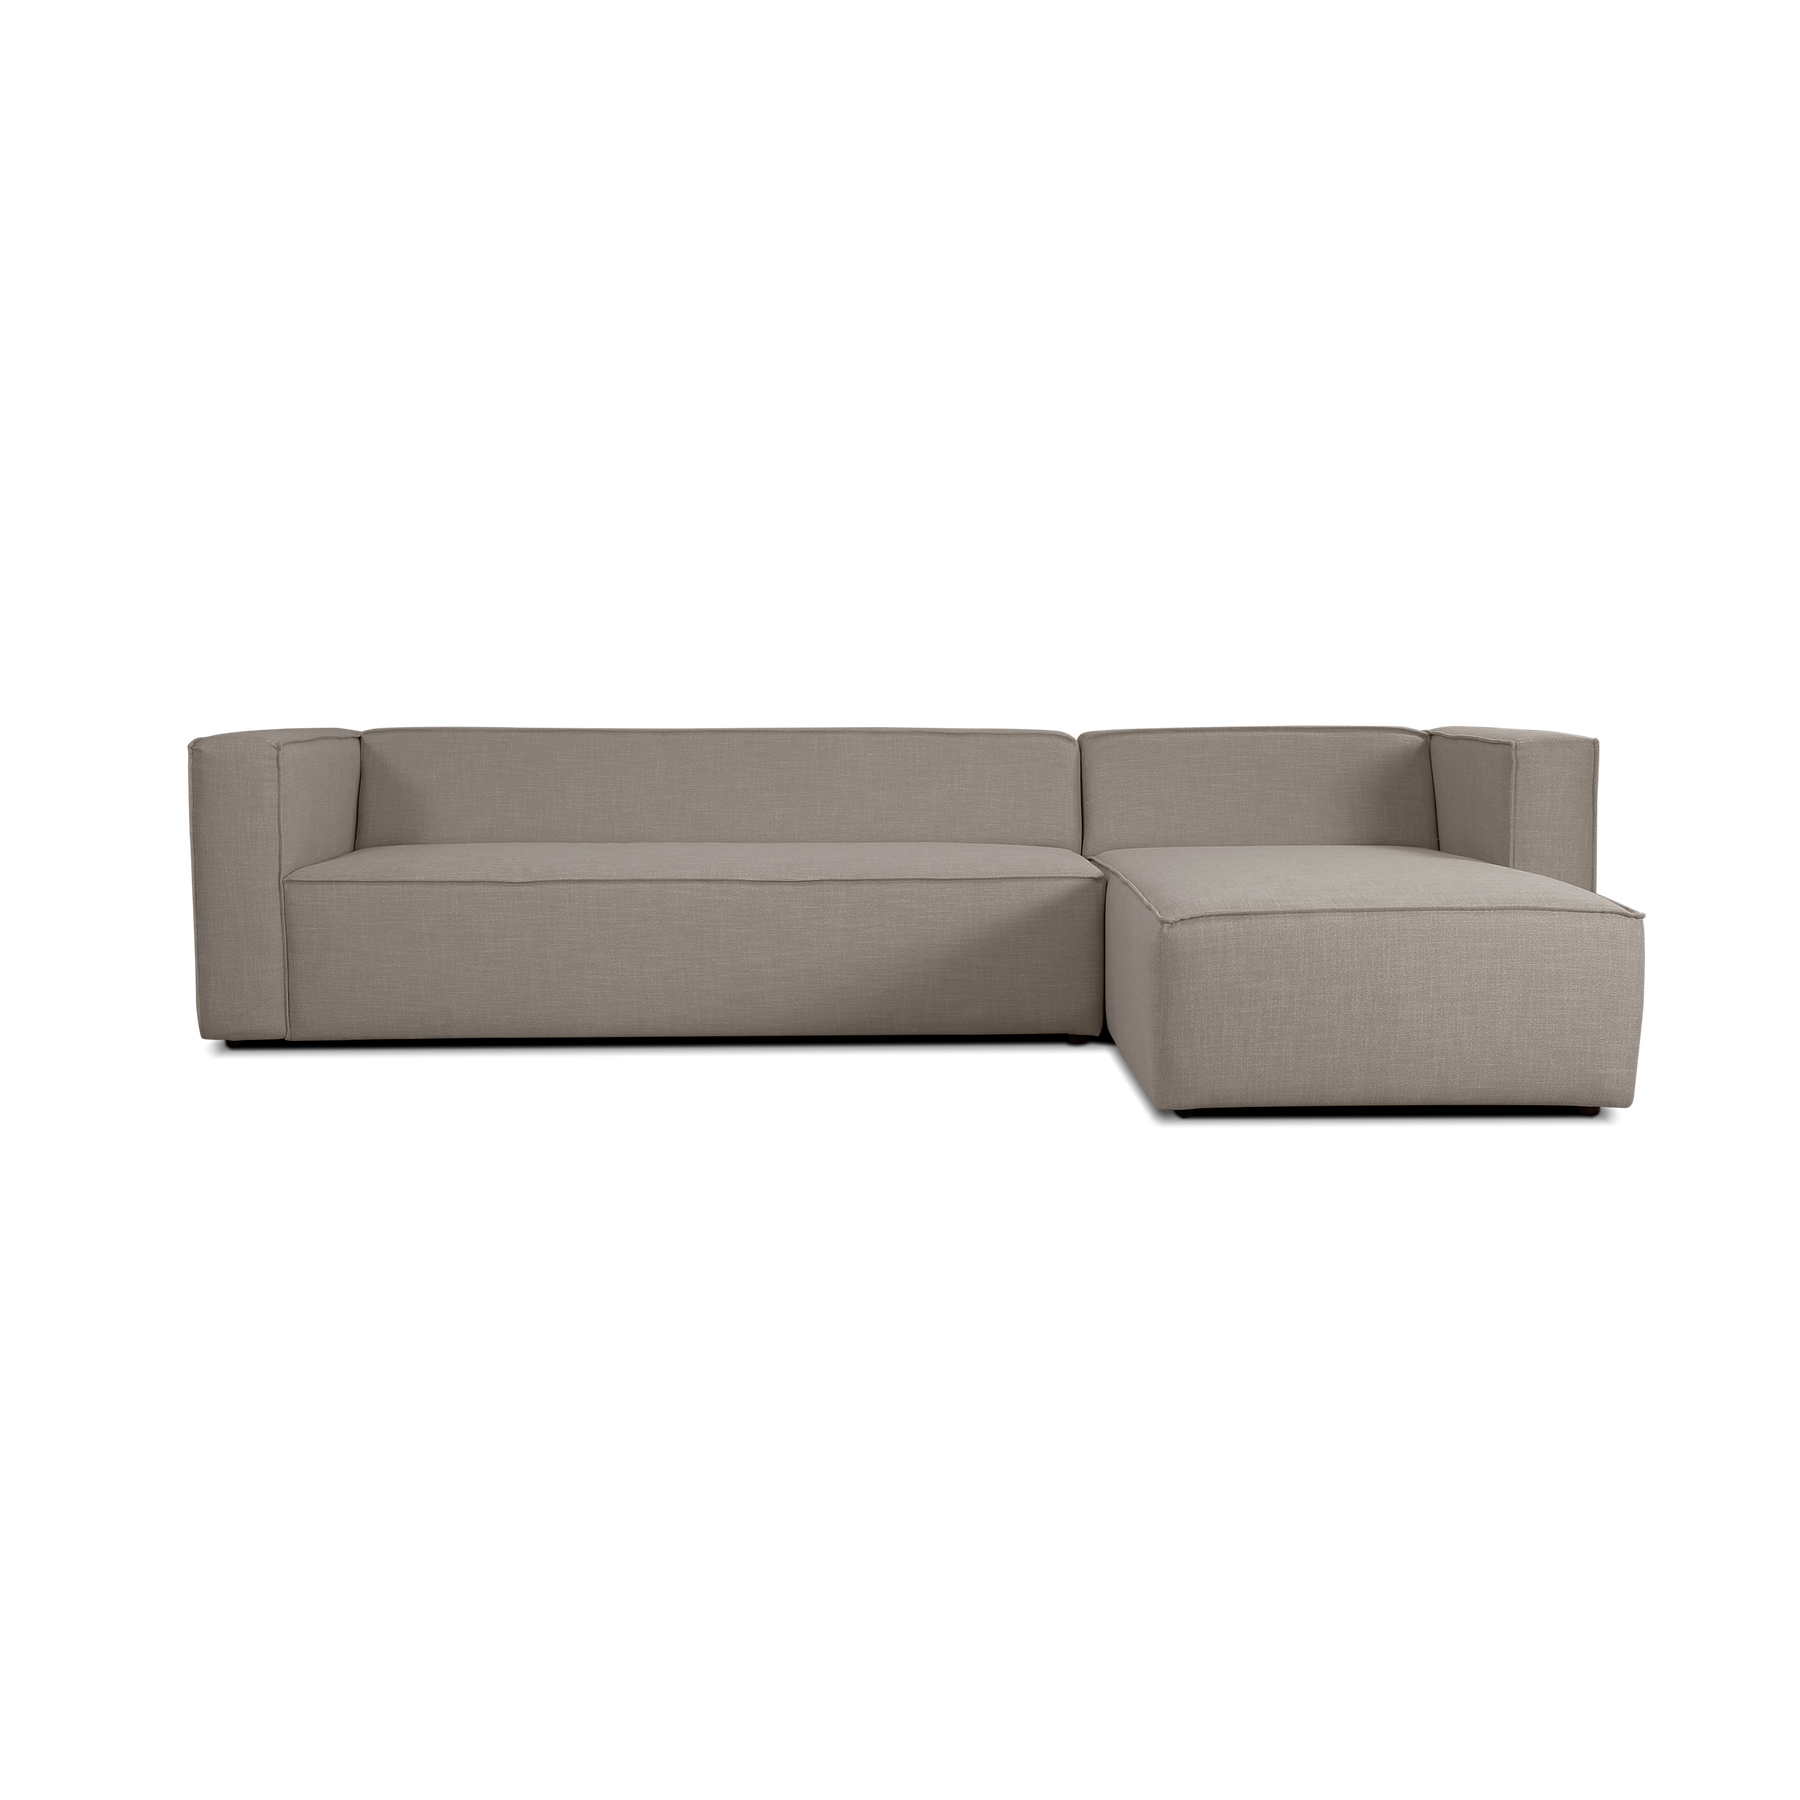 Large: 3 Seater + Daybed [Right]